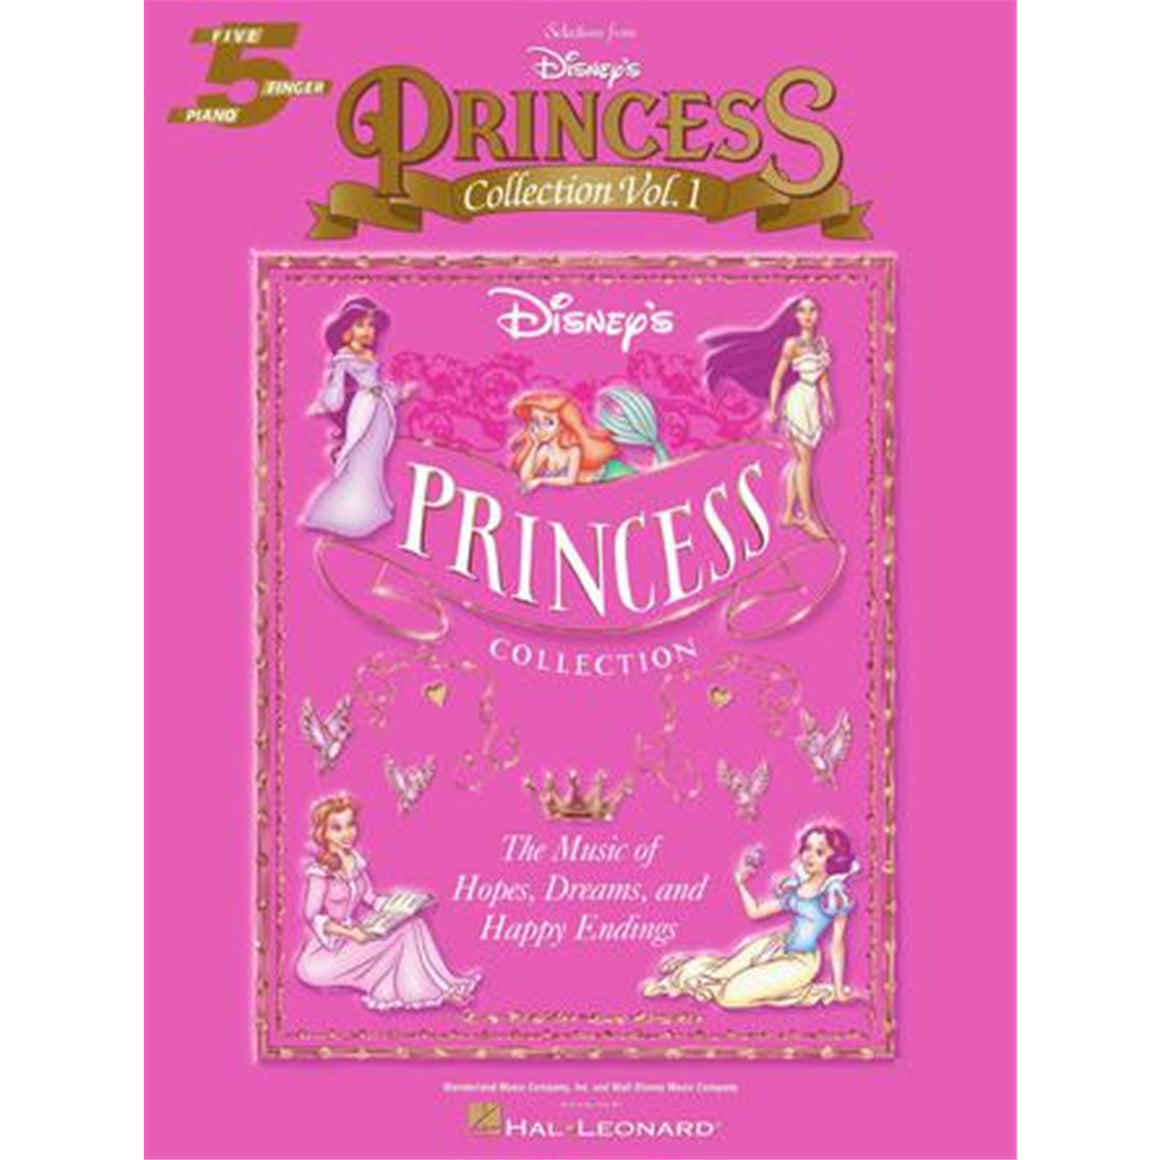 HAL LEONARD 310847 Selections from Disney's Princess Collection Vol. 1